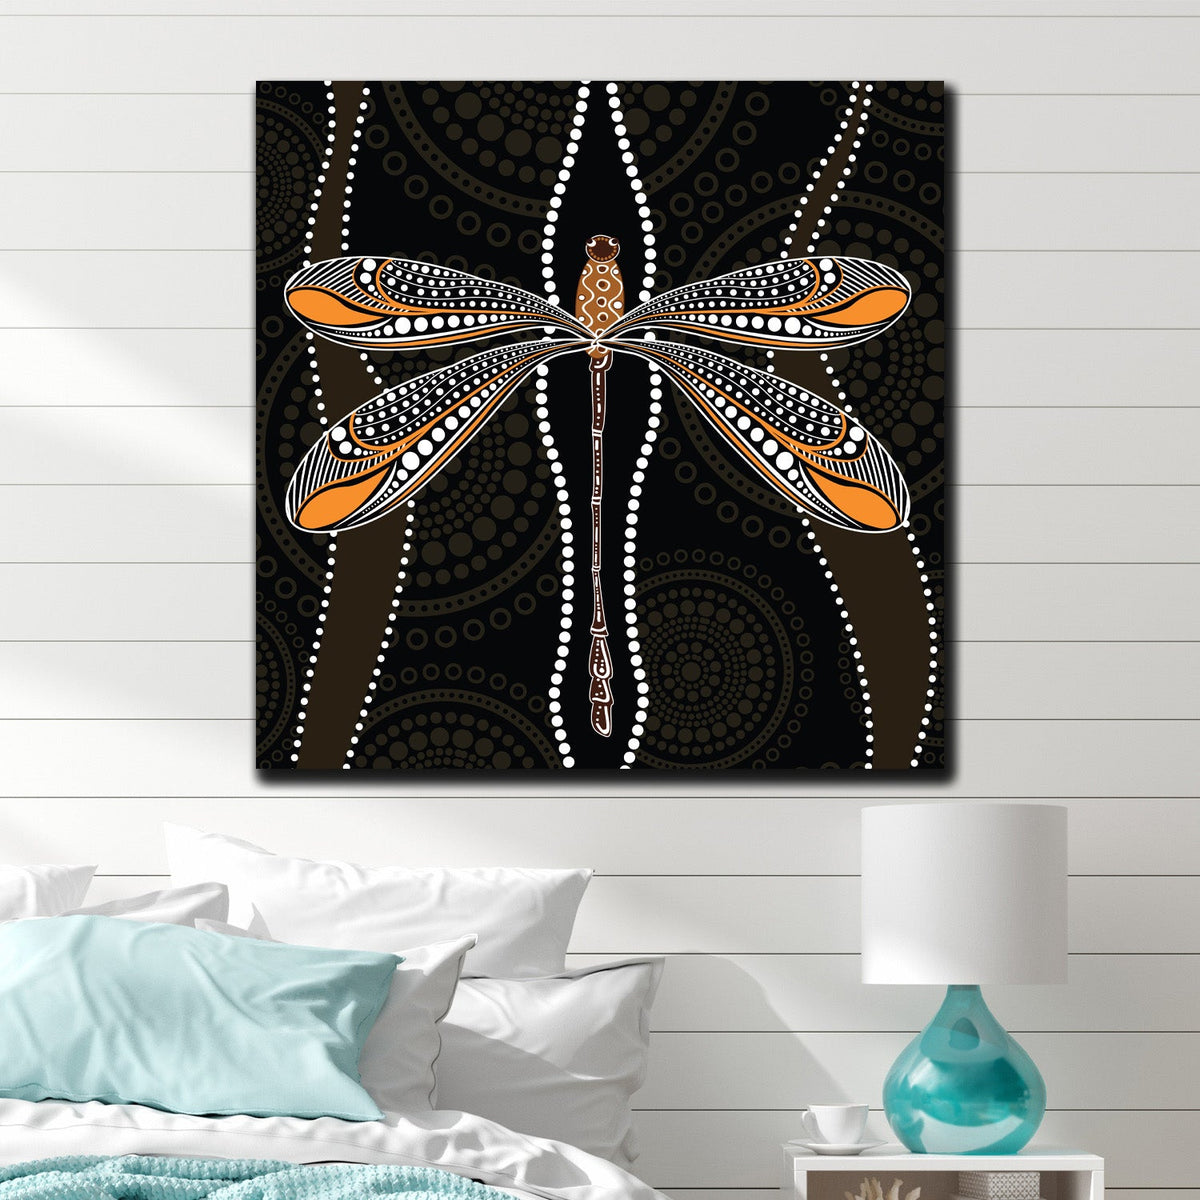 https://cdn.shopify.com/s/files/1/0387/9986/8044/products/DragonflyCanvasArtprintStretched-4.jpg